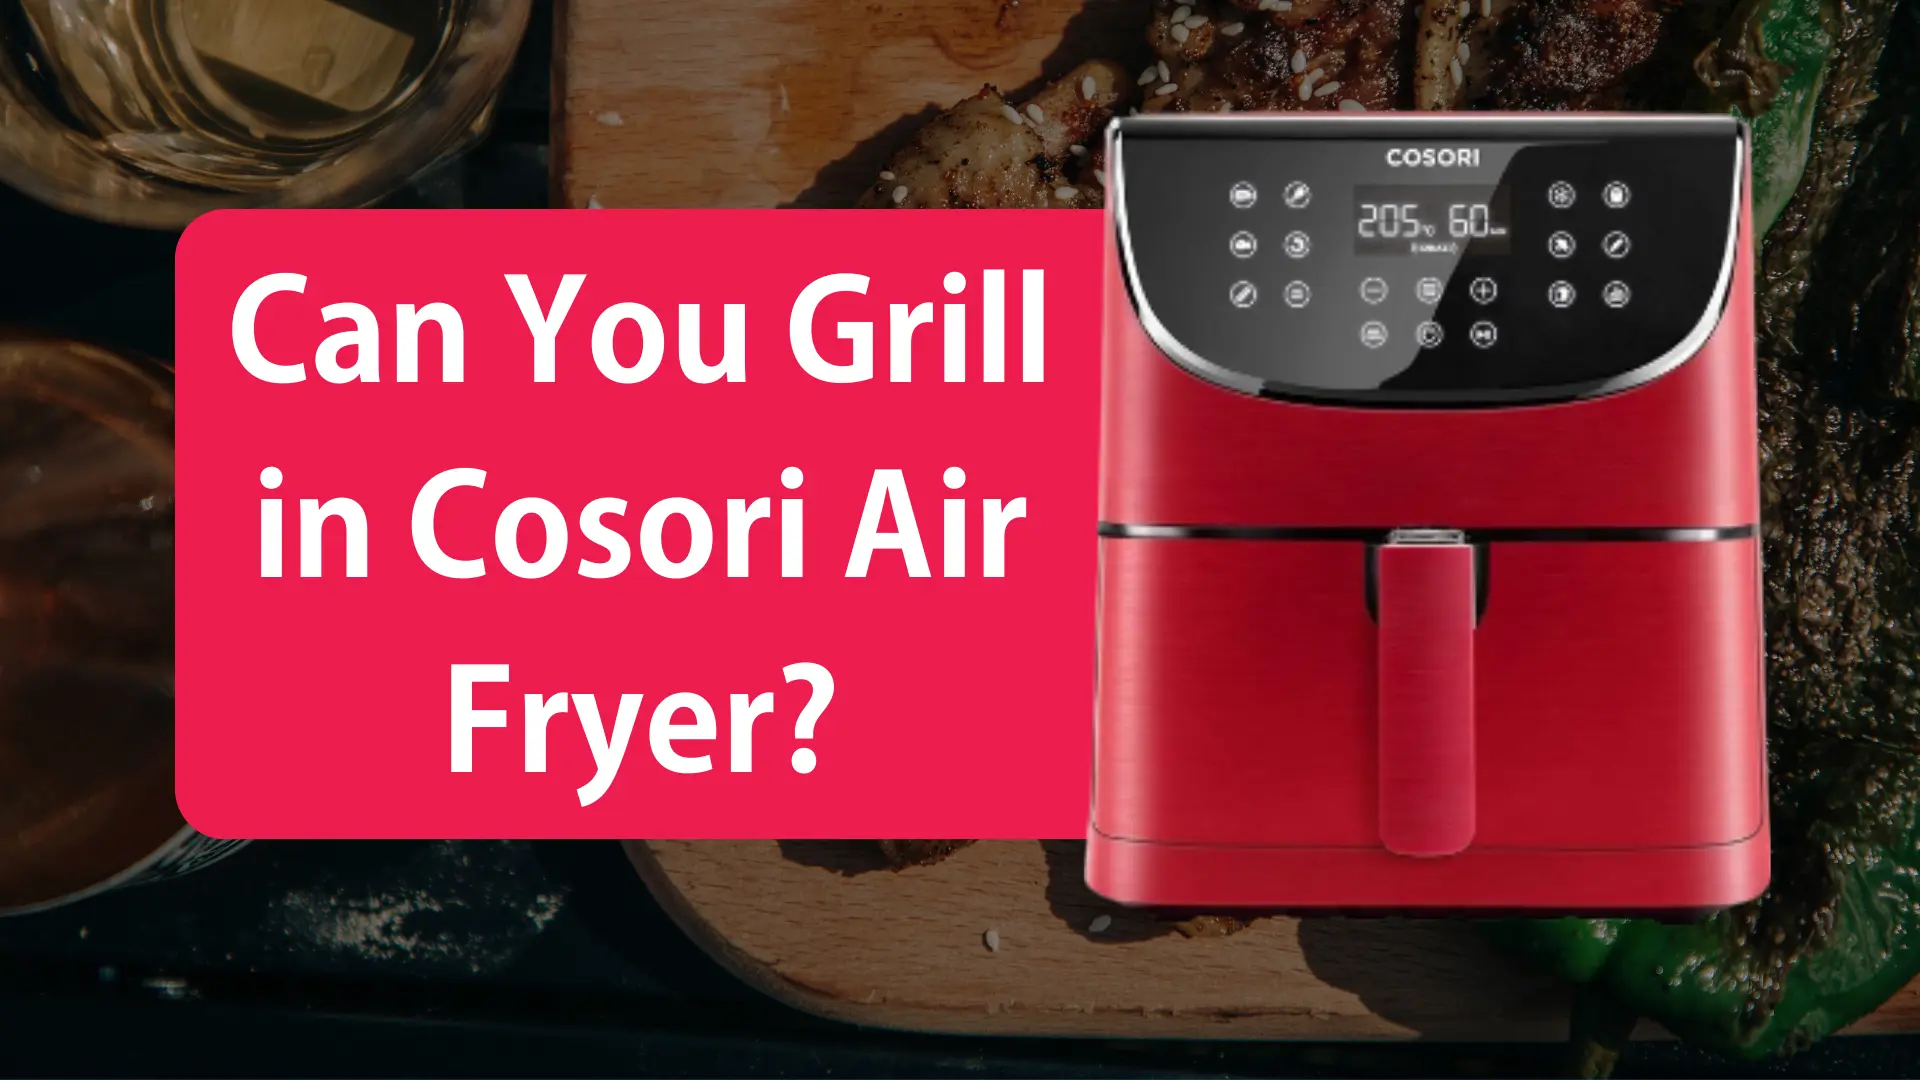 Can You Grill in Cosori Air Fryer